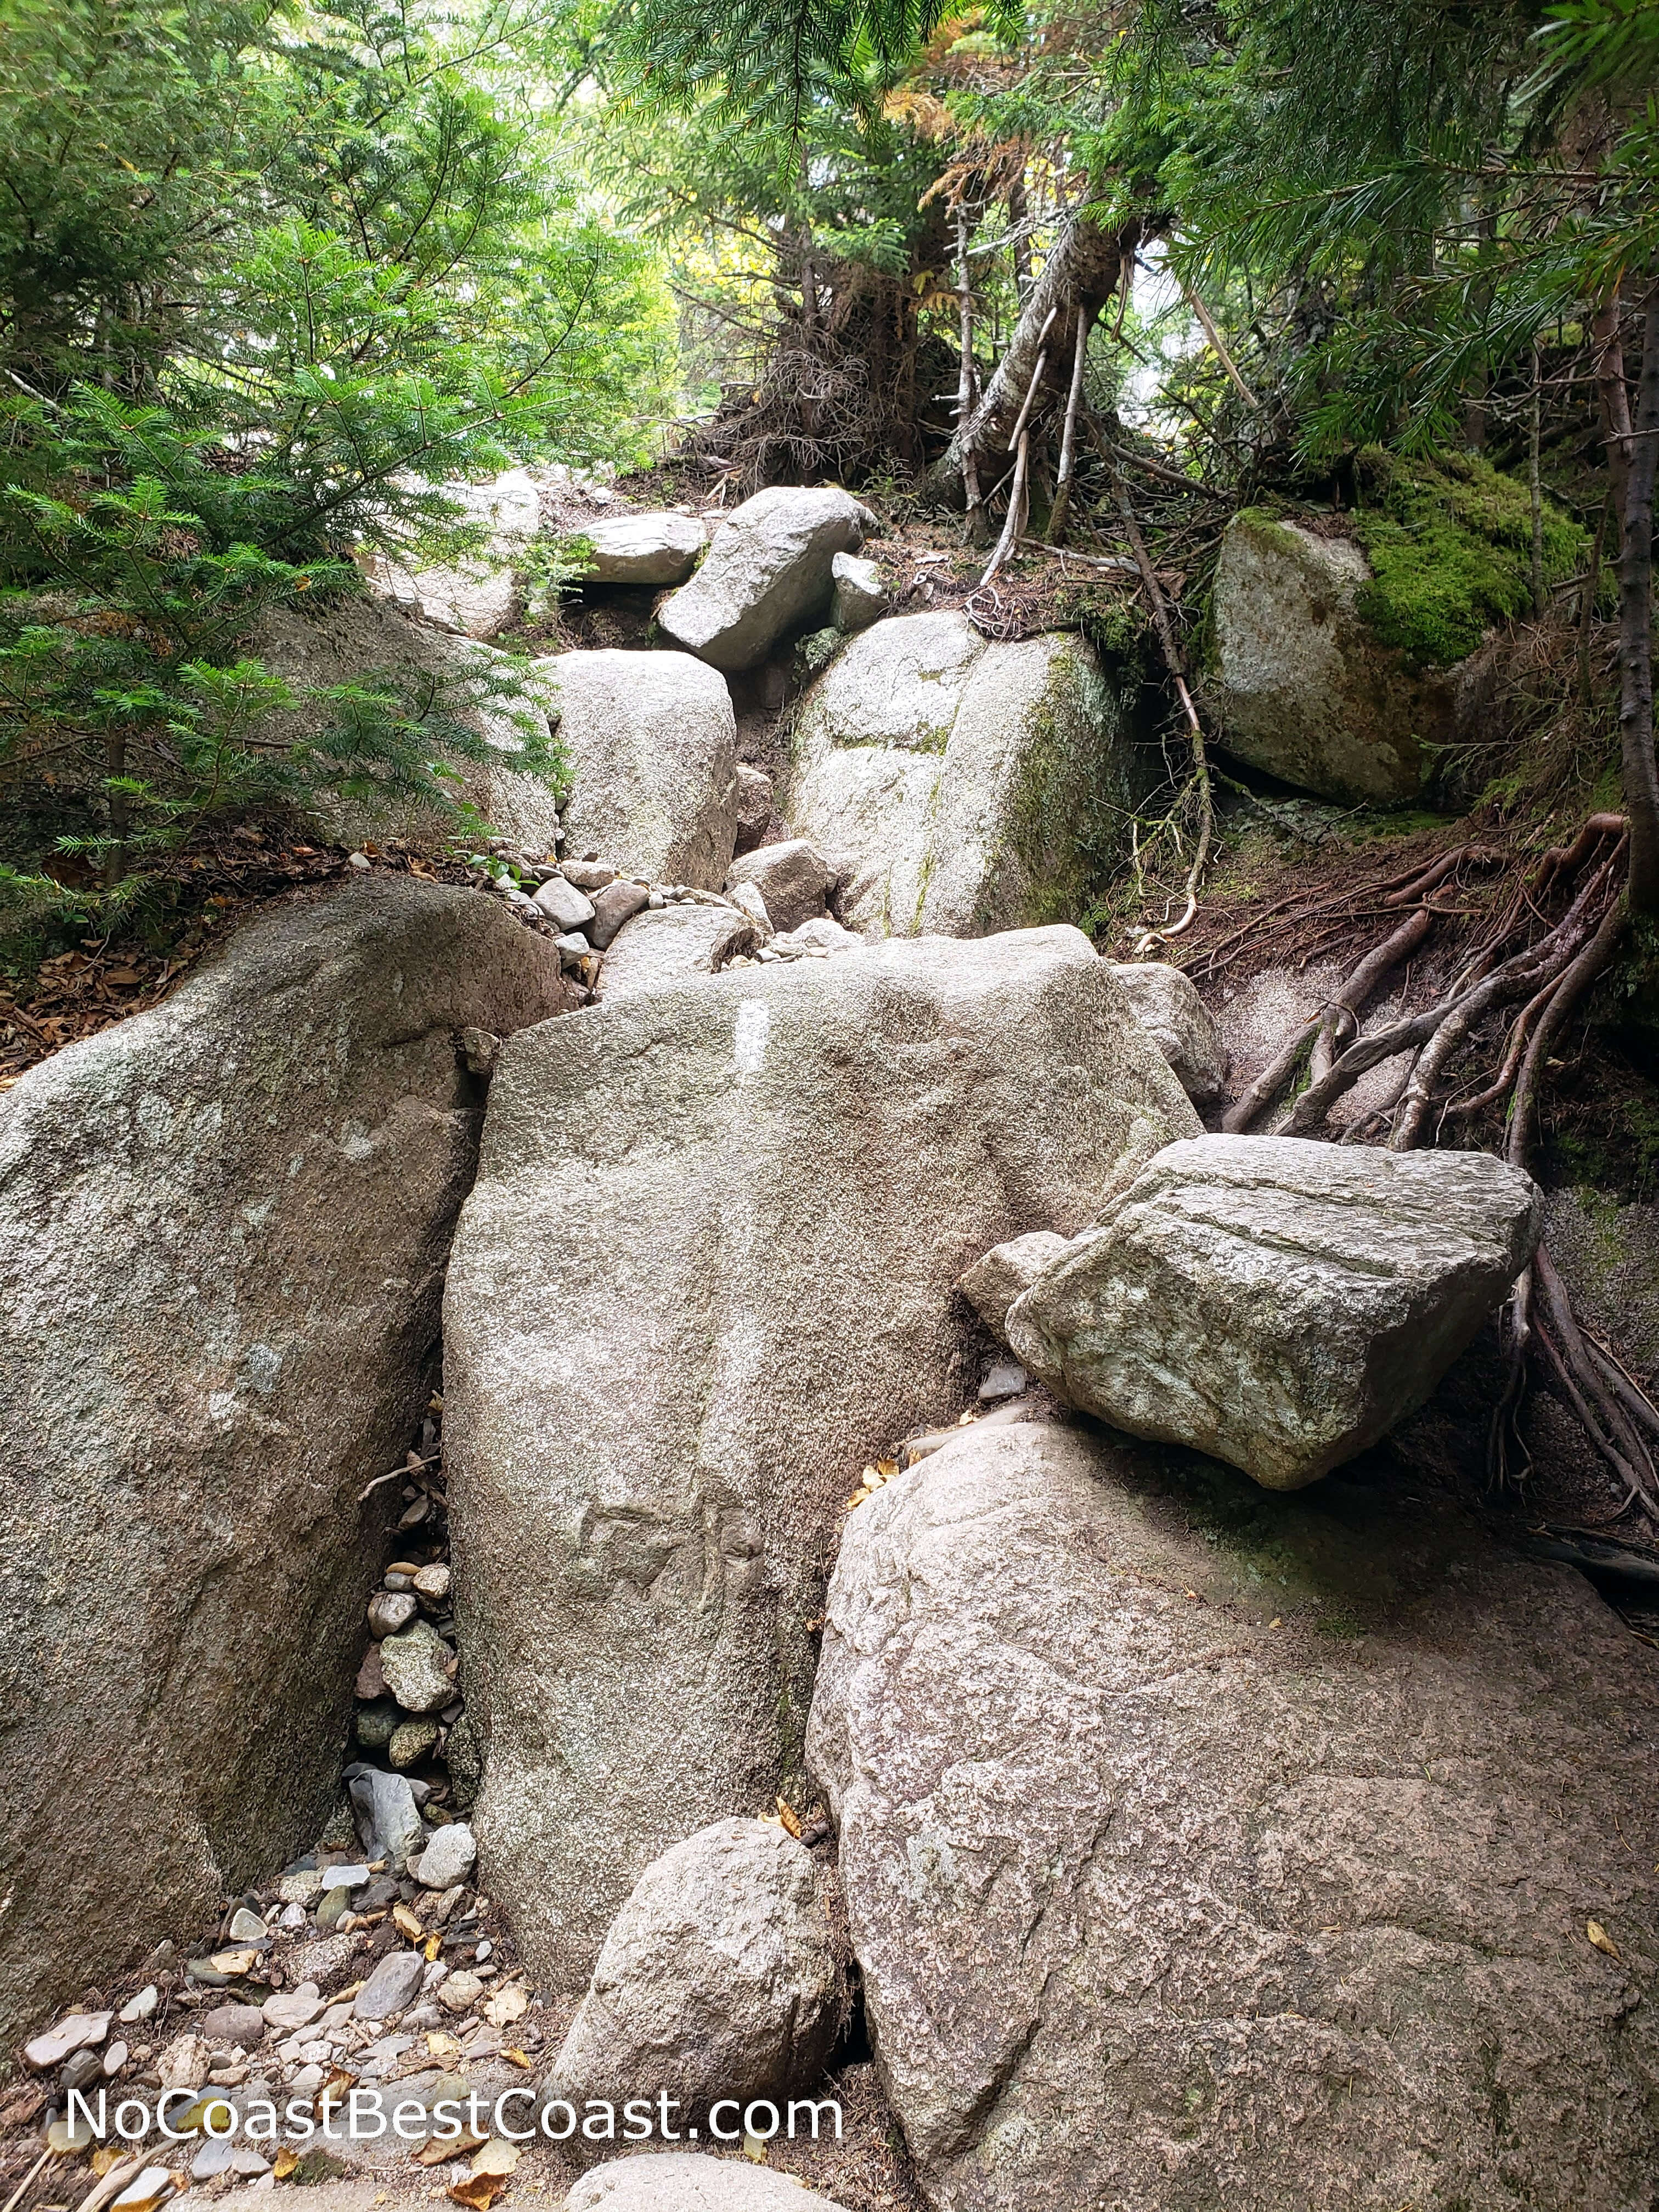 You'll have to climb up many boulders like these on this steep trail